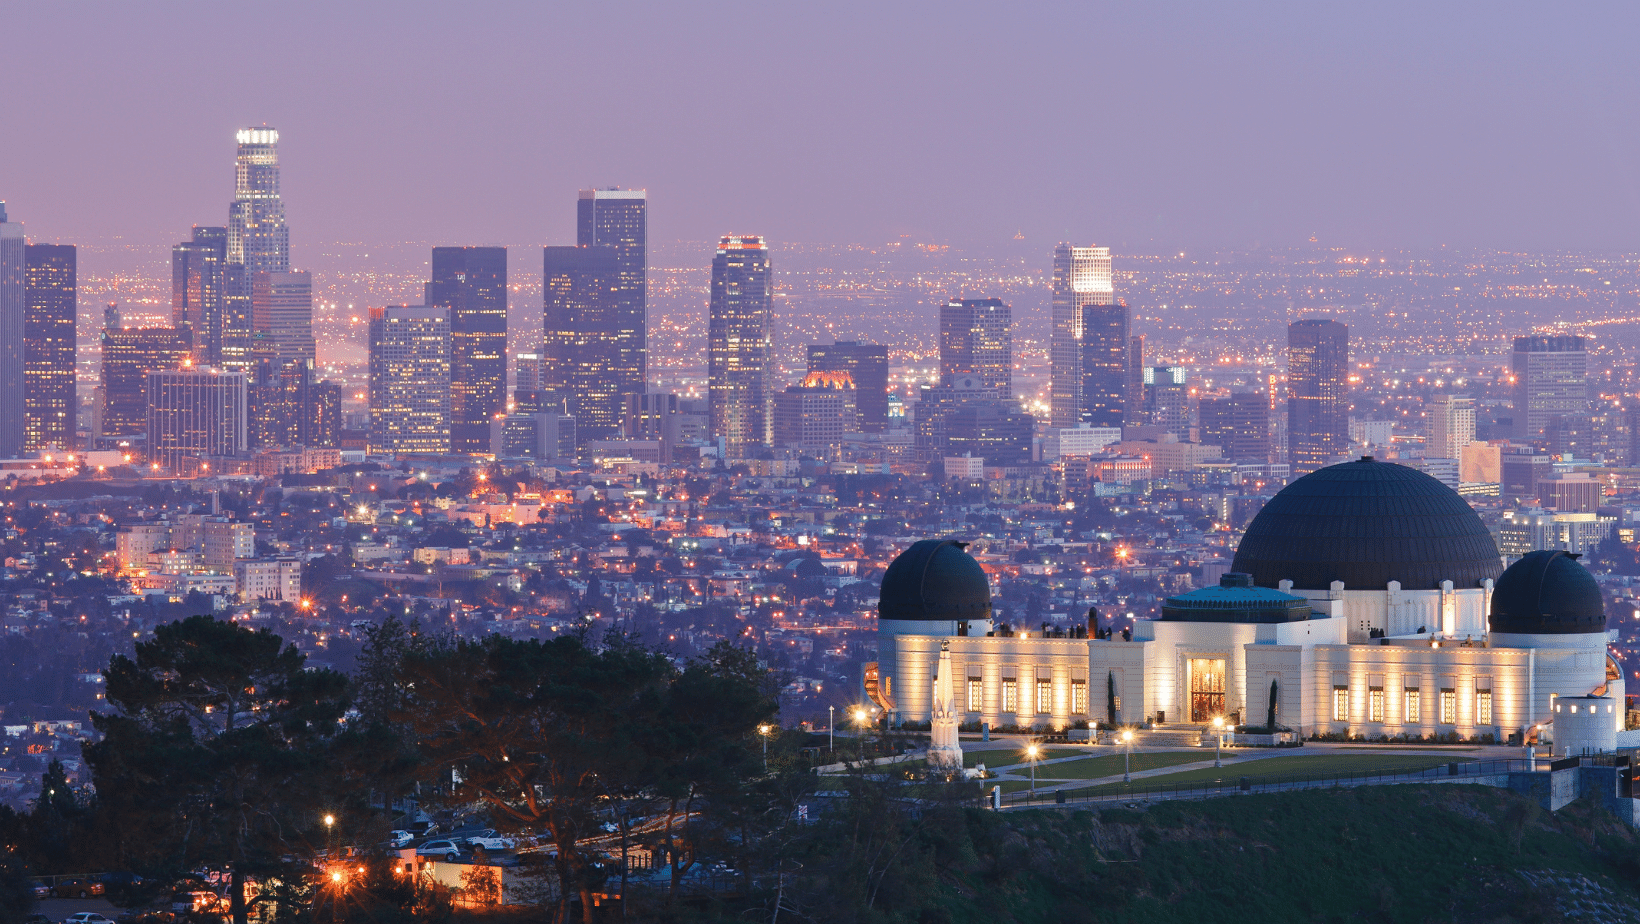 Los Angeles night skyline observed from the observatory.